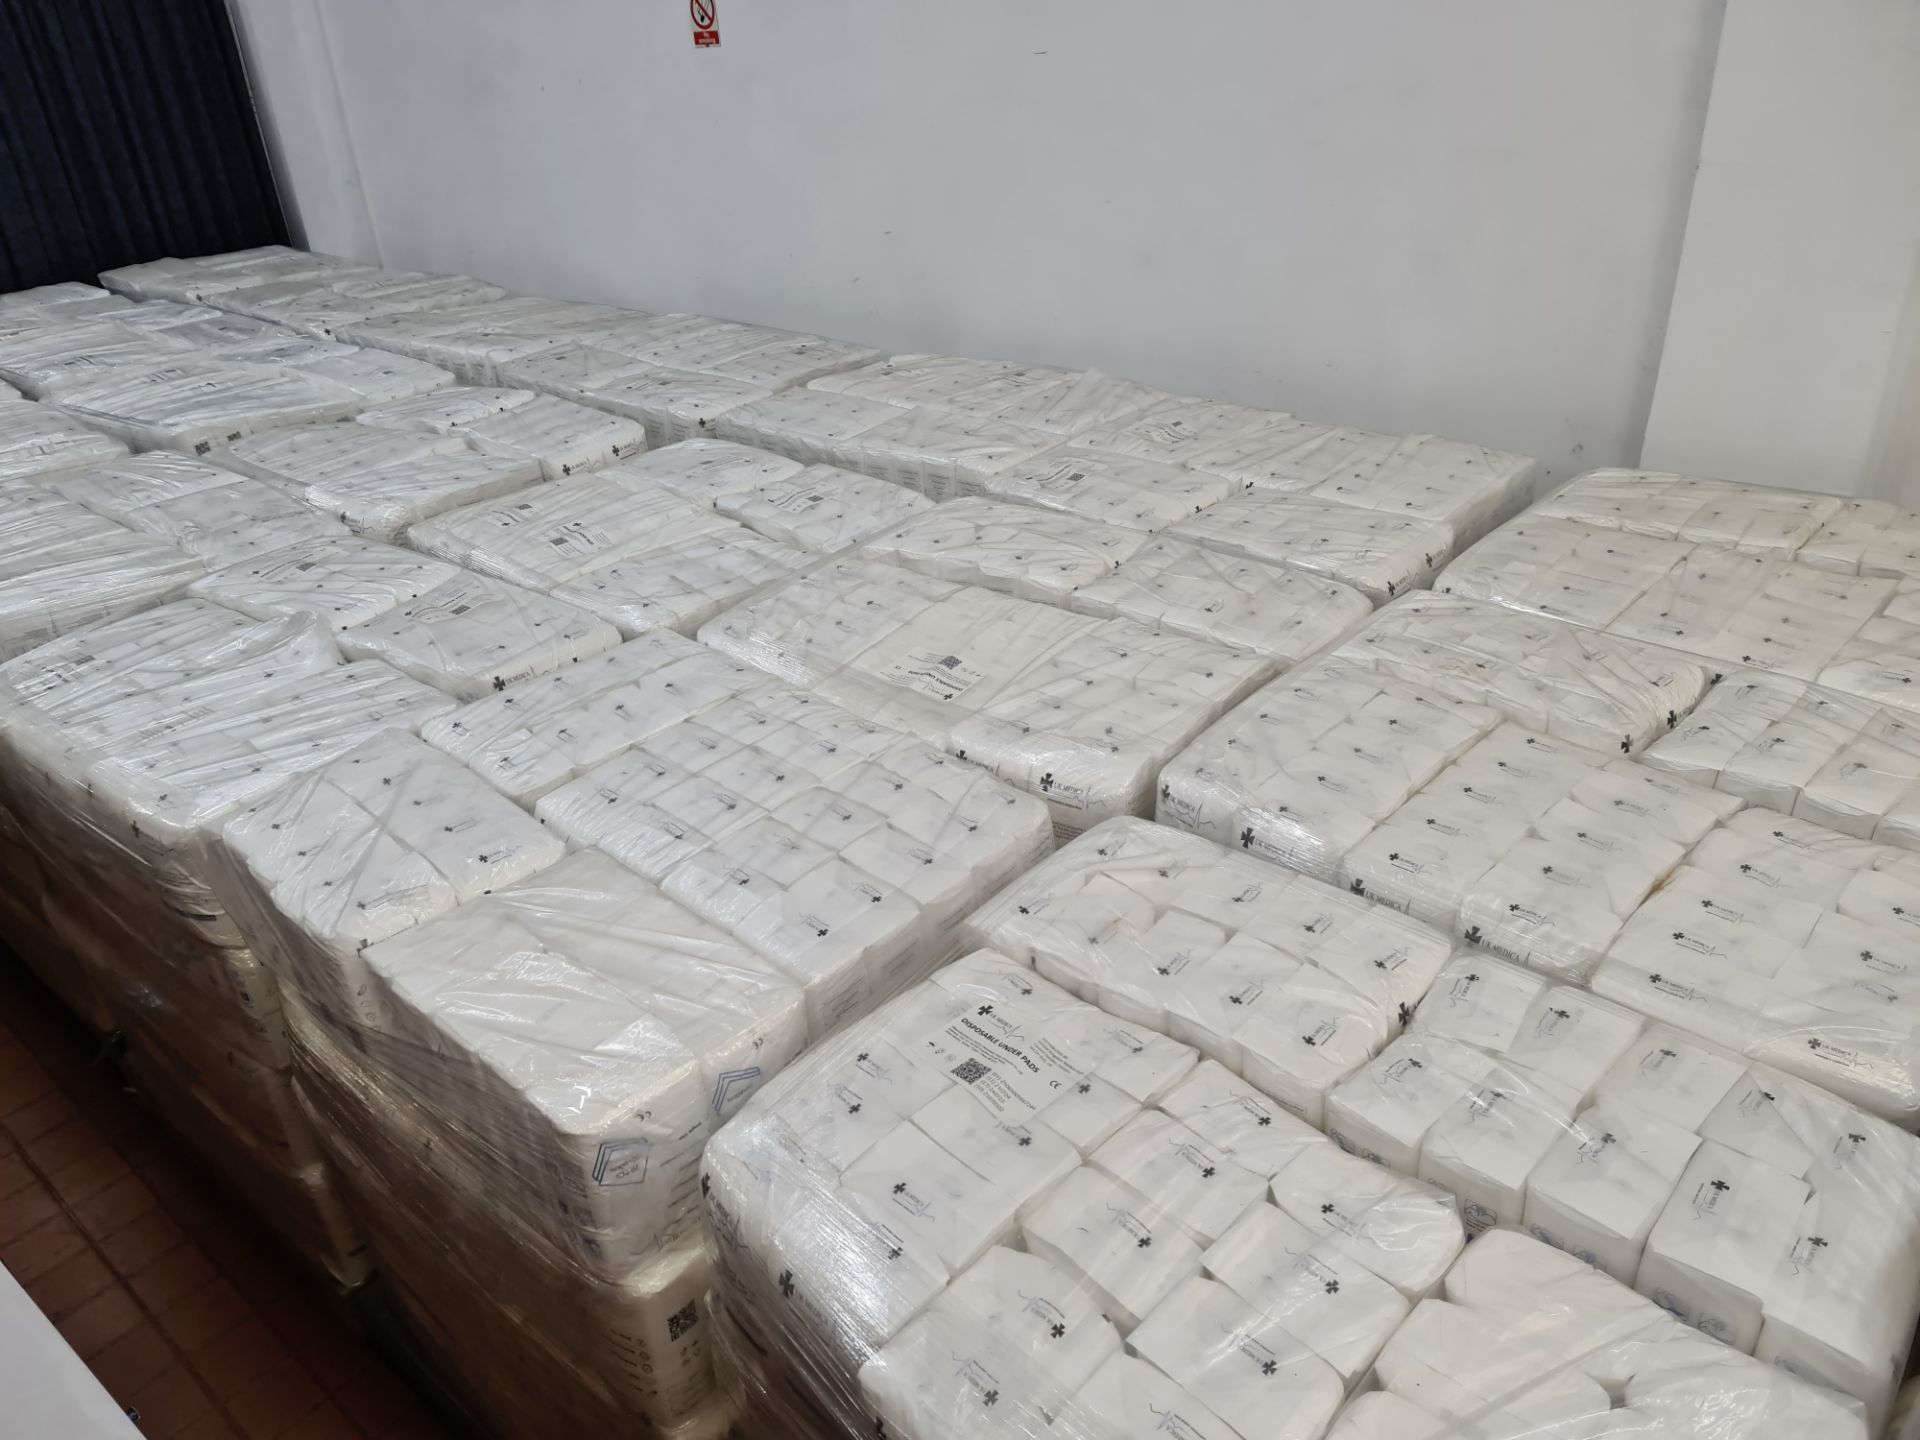 4,859 packs off 60 x 60cm disposable under pads - Image 7 of 12